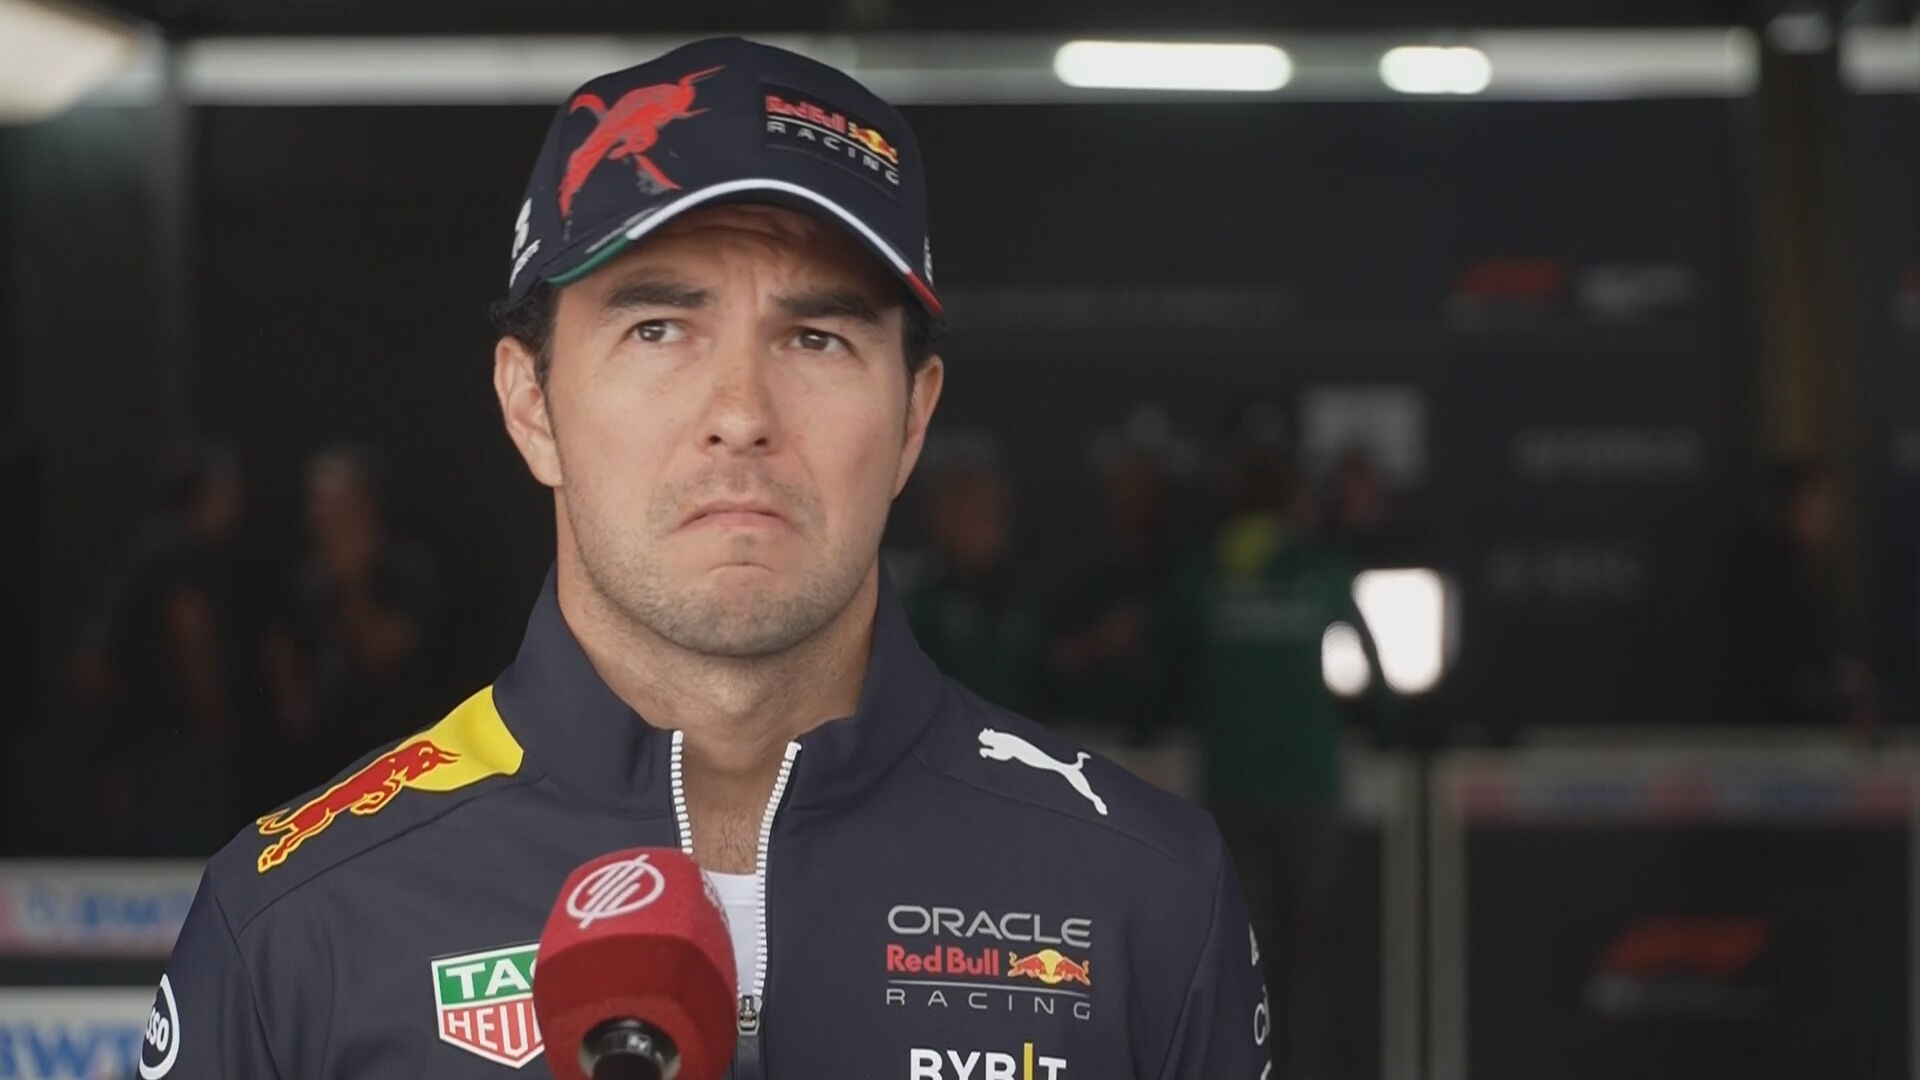 Perez confirmed that his situation worsened with the developments of Red Bull